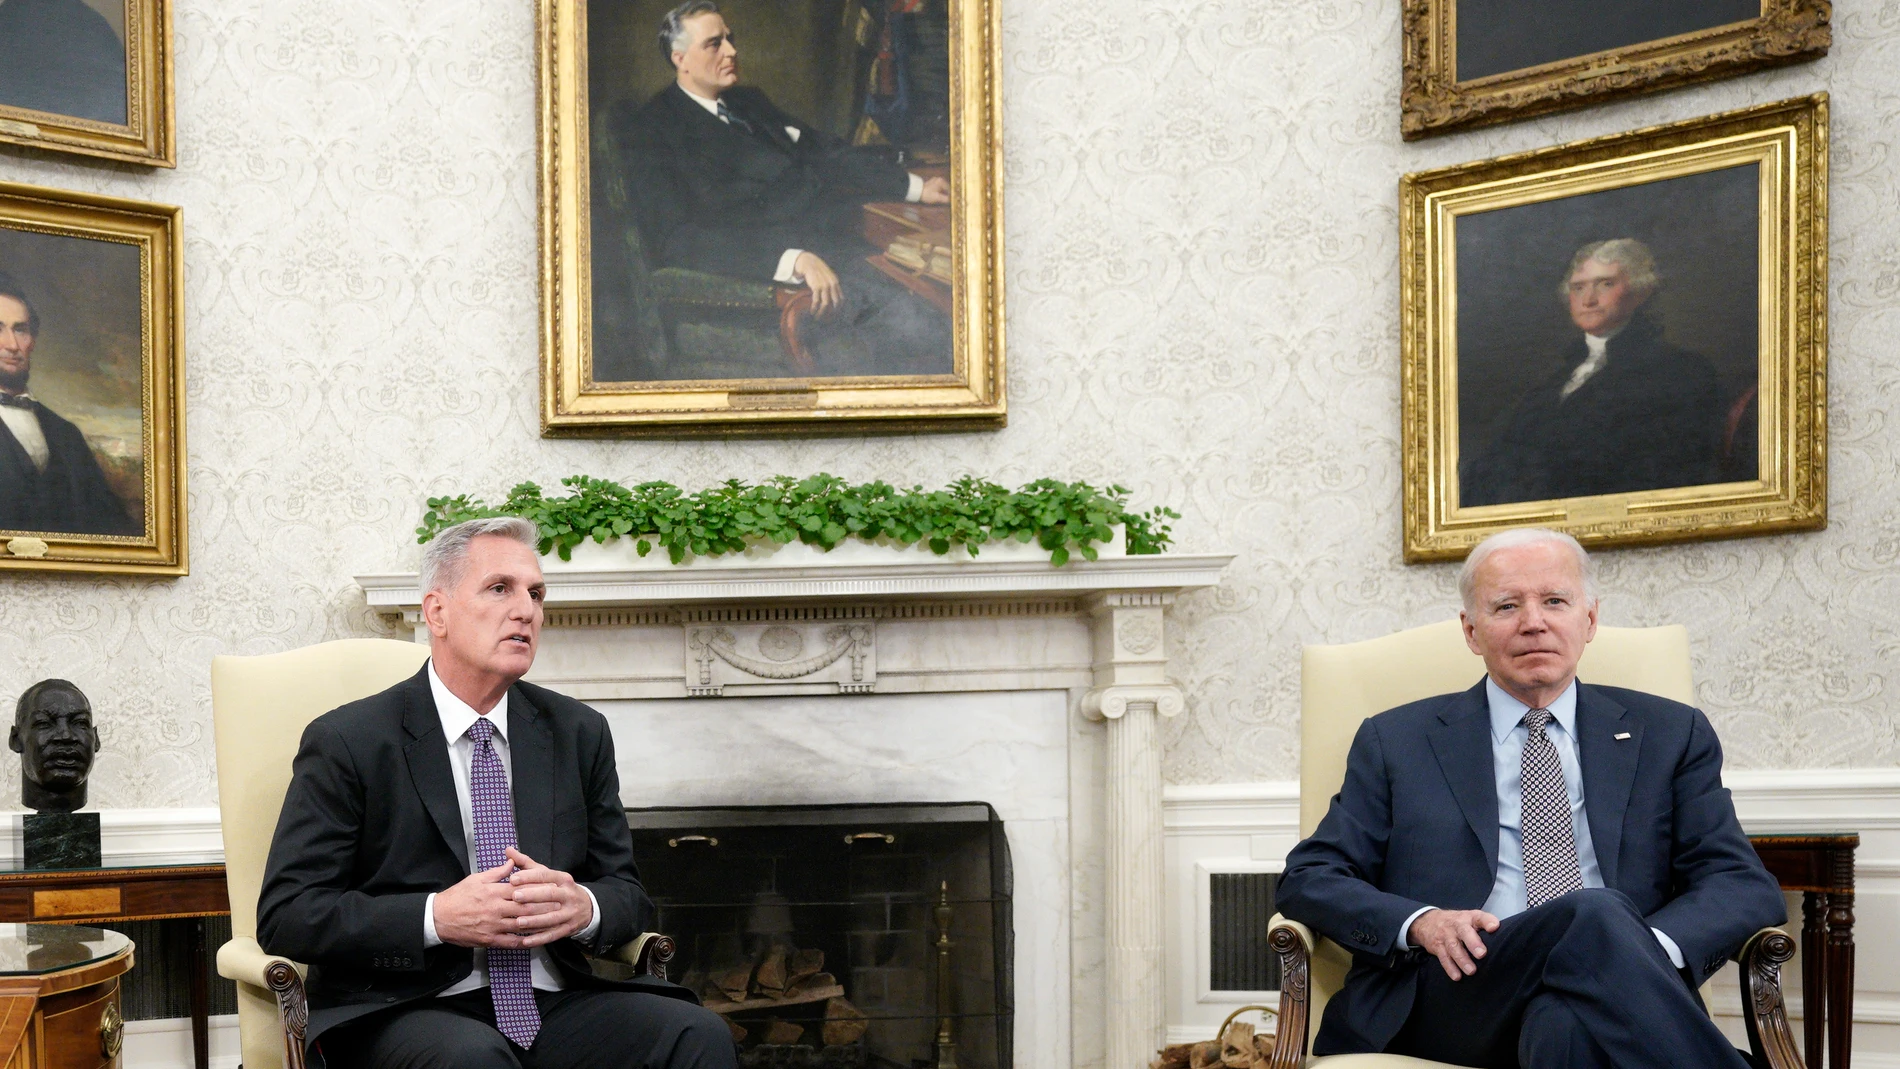 May 22, 2023, Washington, District of Columbia, USA: United States President Joe Biden, right, meets with Speaker of the US House of Representatives Kevin McCarthy (Republican of California), left, in the Oval Office of the White House in Washington, DC on May 22, 2023 23/05/2023